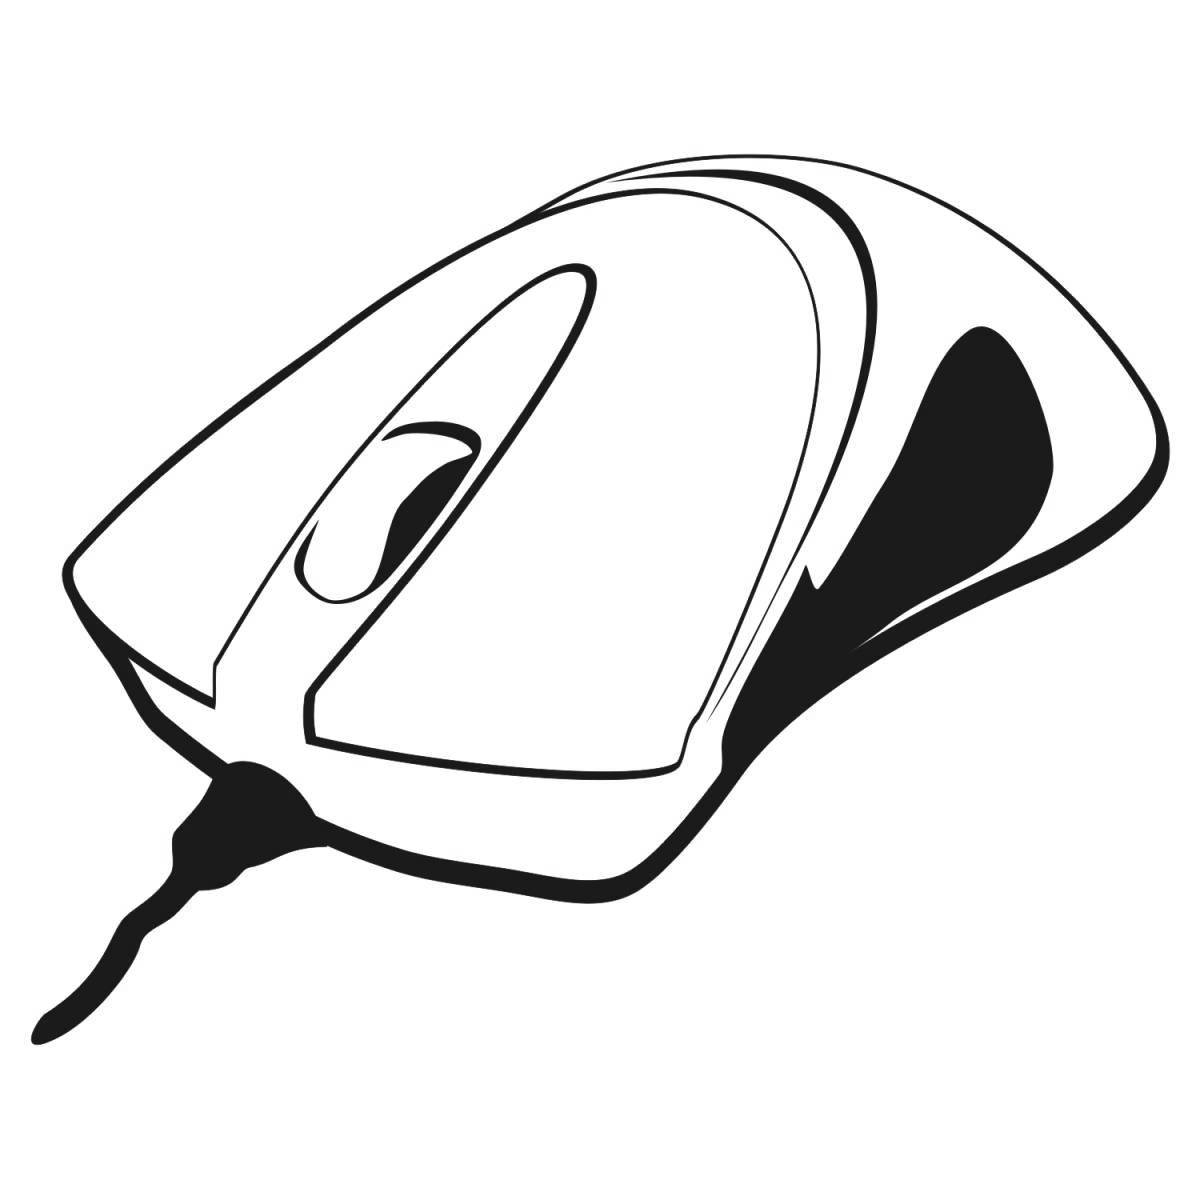 Playful computer mouse coloring page